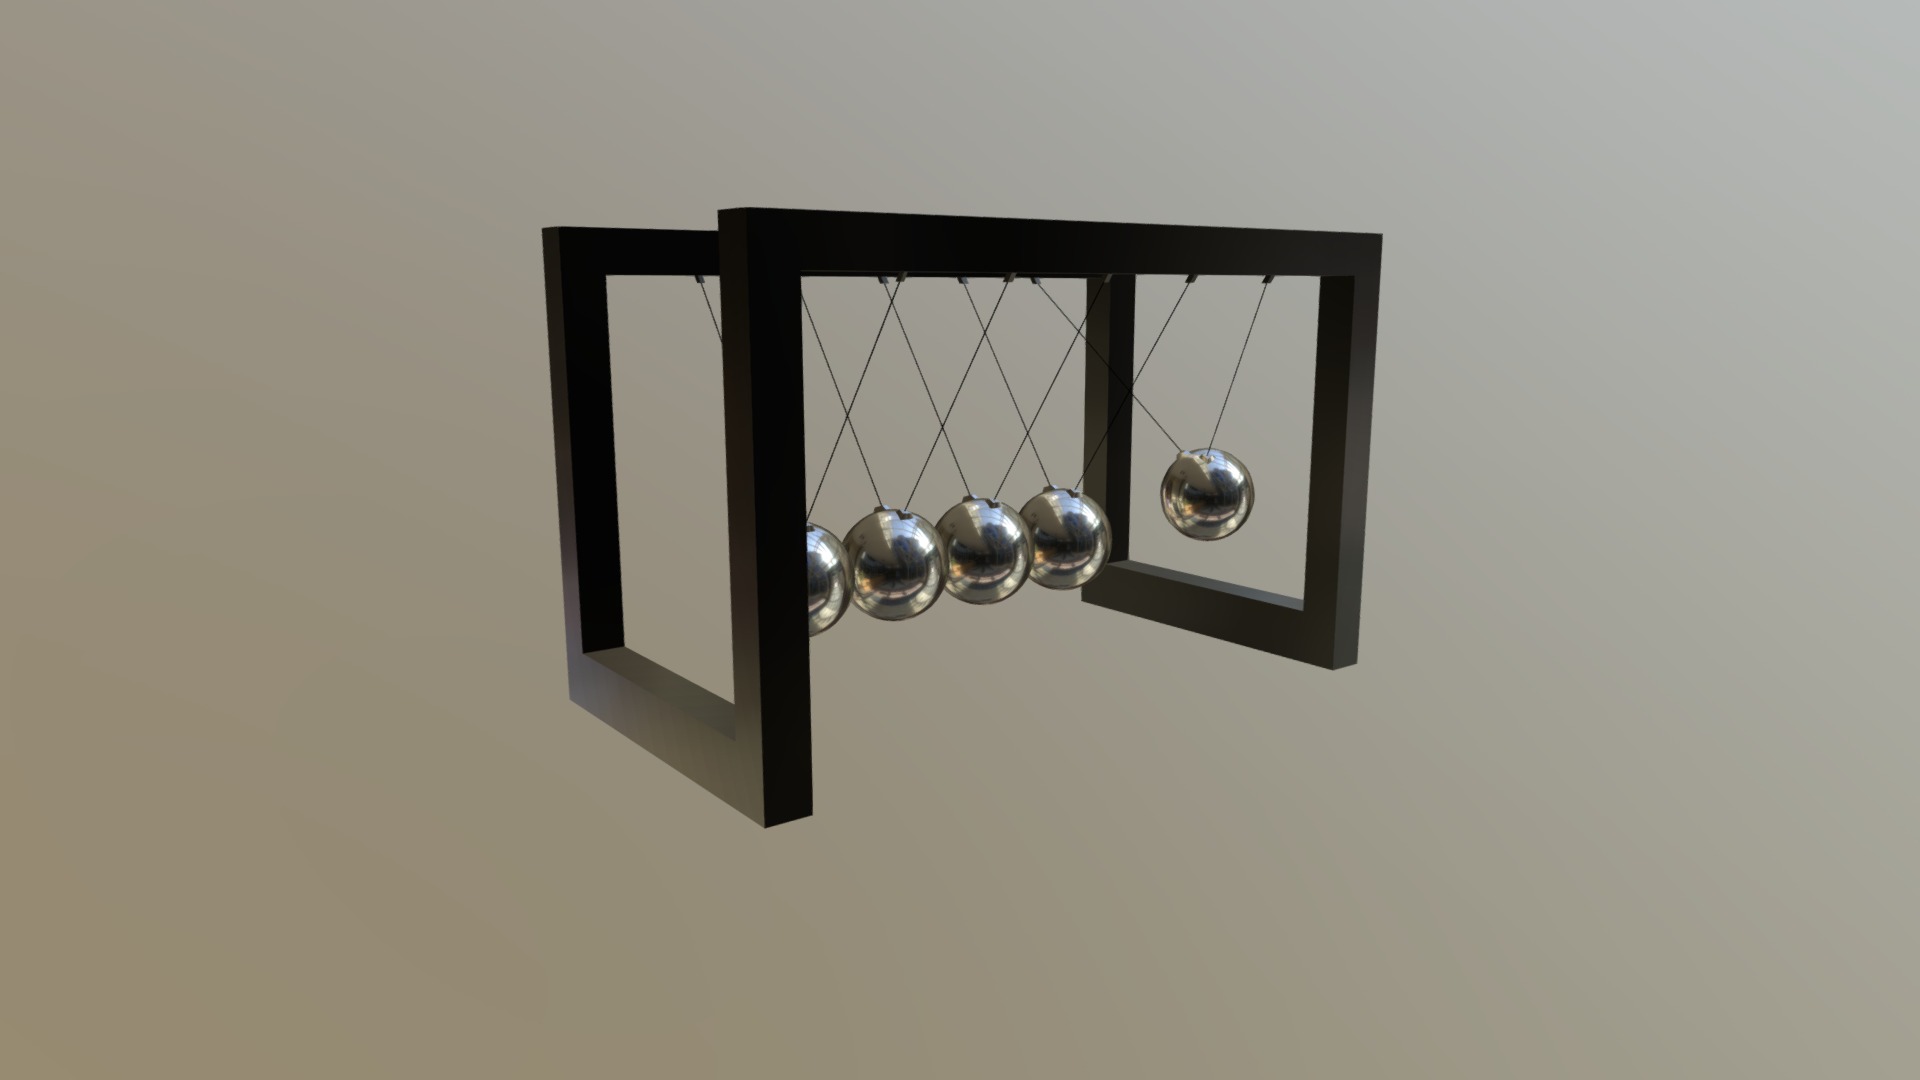 3D model Newtonian Pendulum - This is a 3D model of the Newtonian Pendulum. The 3D model is about a black and white photo of a black and silver frame with a few balls on it.